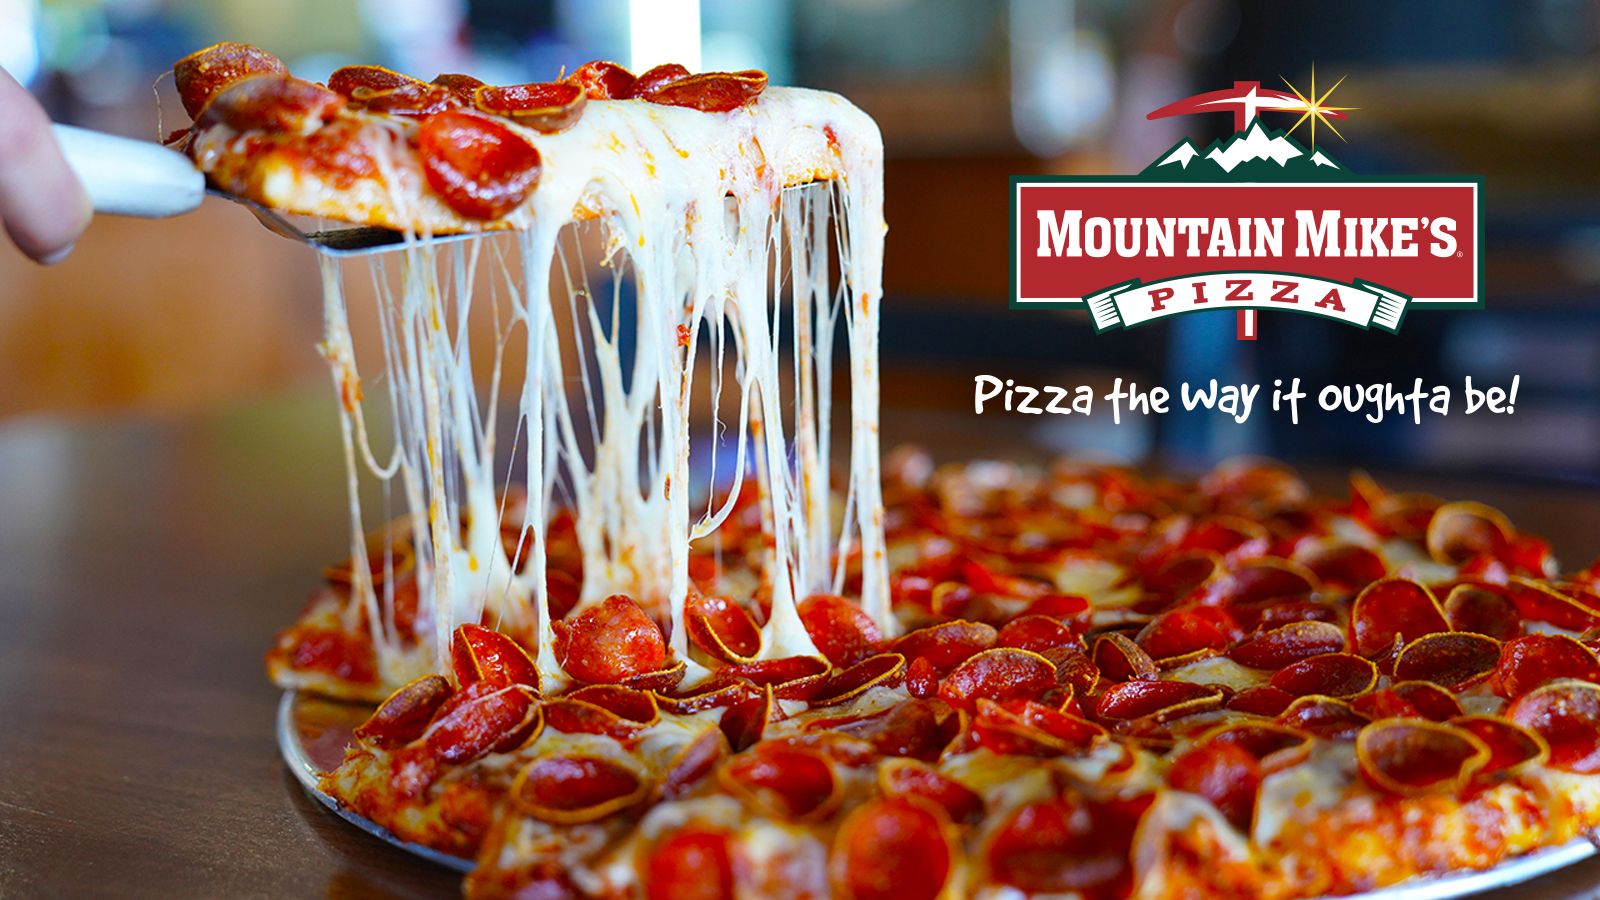 Mountain Mike's Pizza Continues South Bay Expansion With Openings in San Jose & Santa Clara